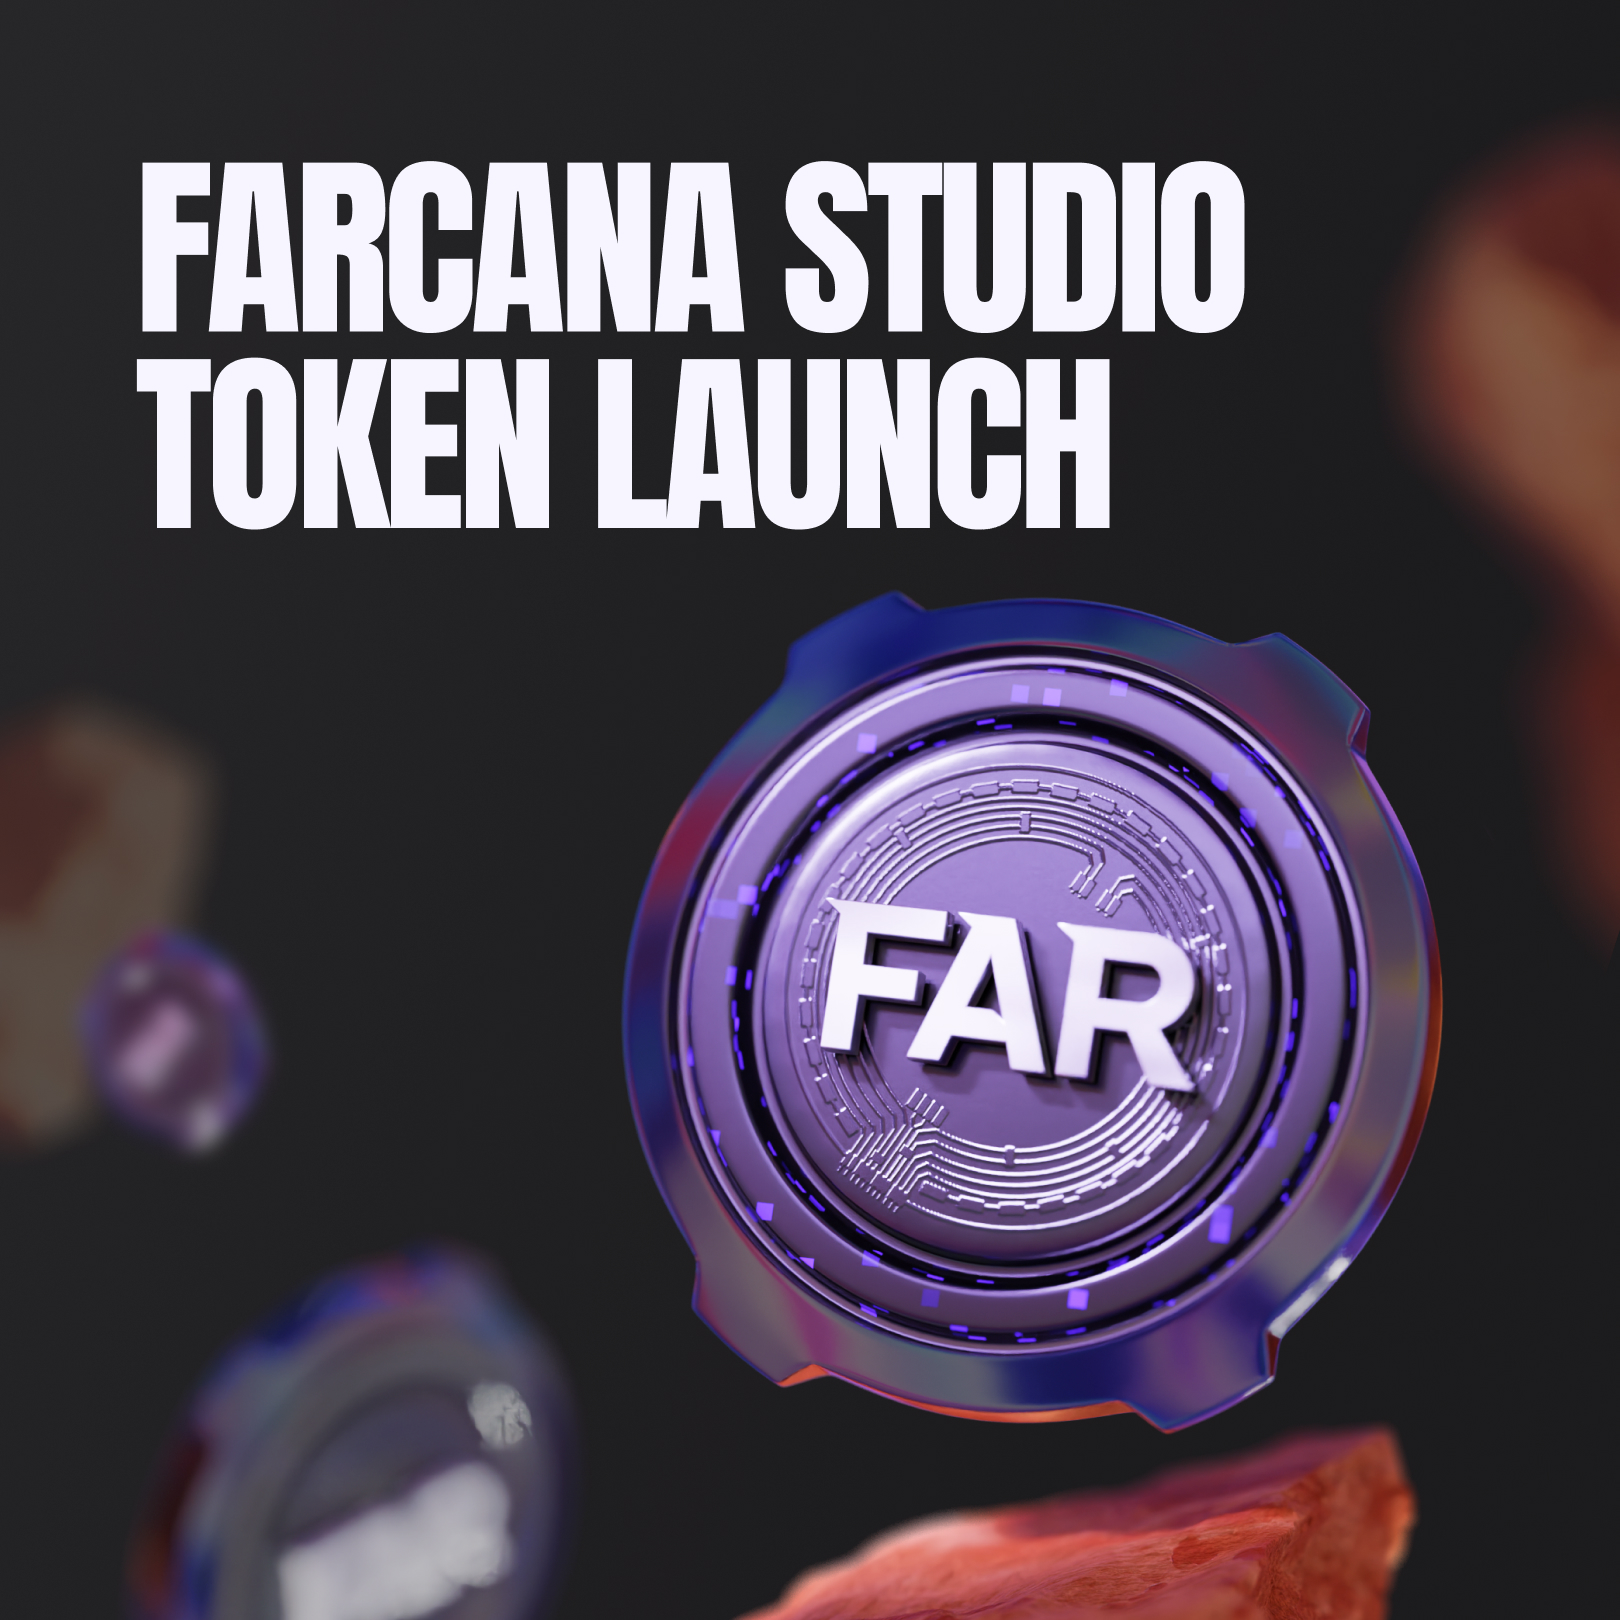 Image for Fast-Growing Game Developer Farcana Studio Launches $FAR Token Setting The Stage For New Gaming Experiences